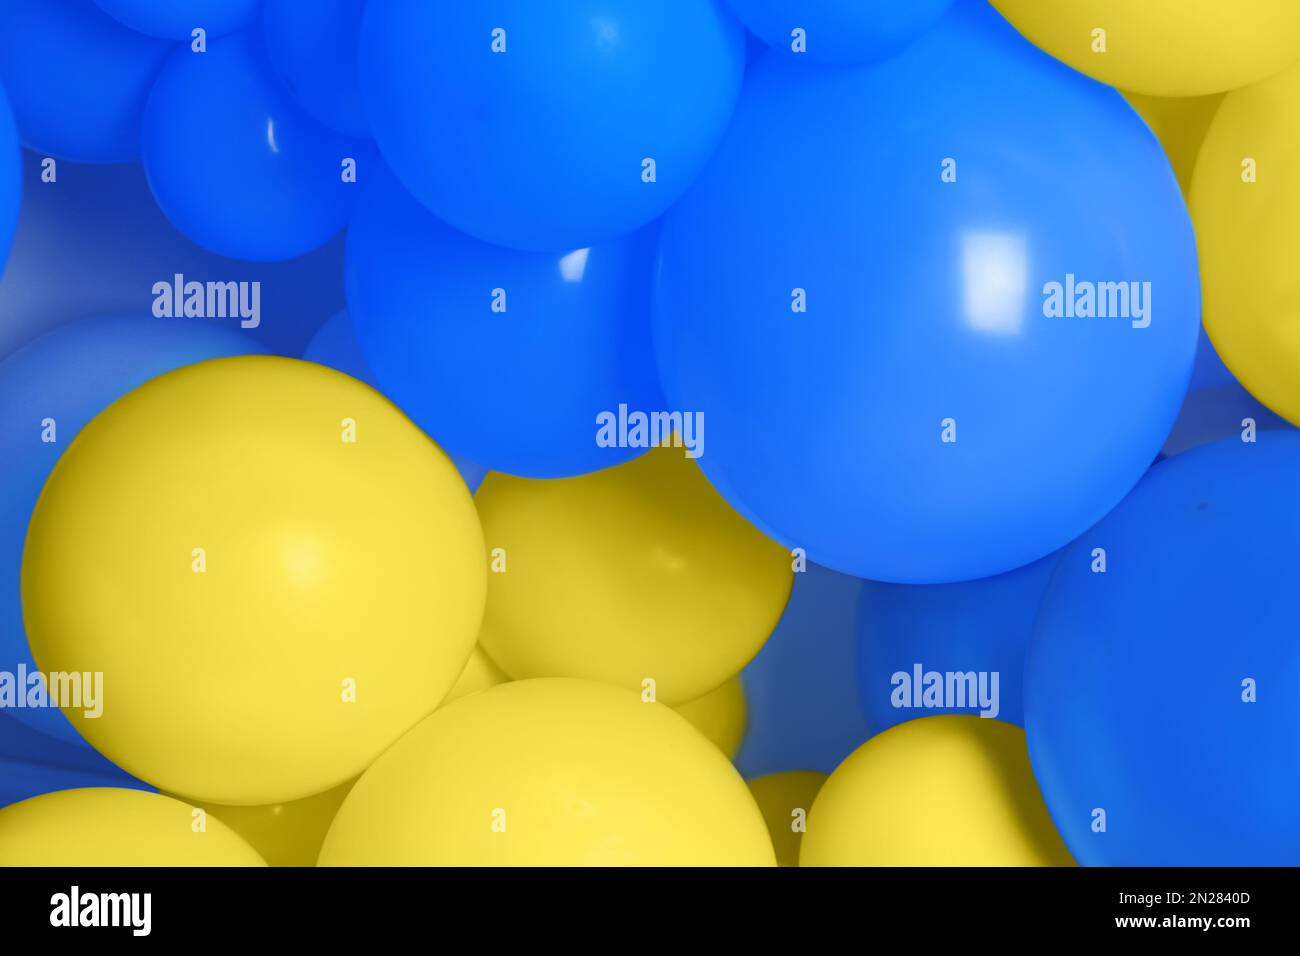 Many balloons in colors of Ukrainian flag as background Stock Photo